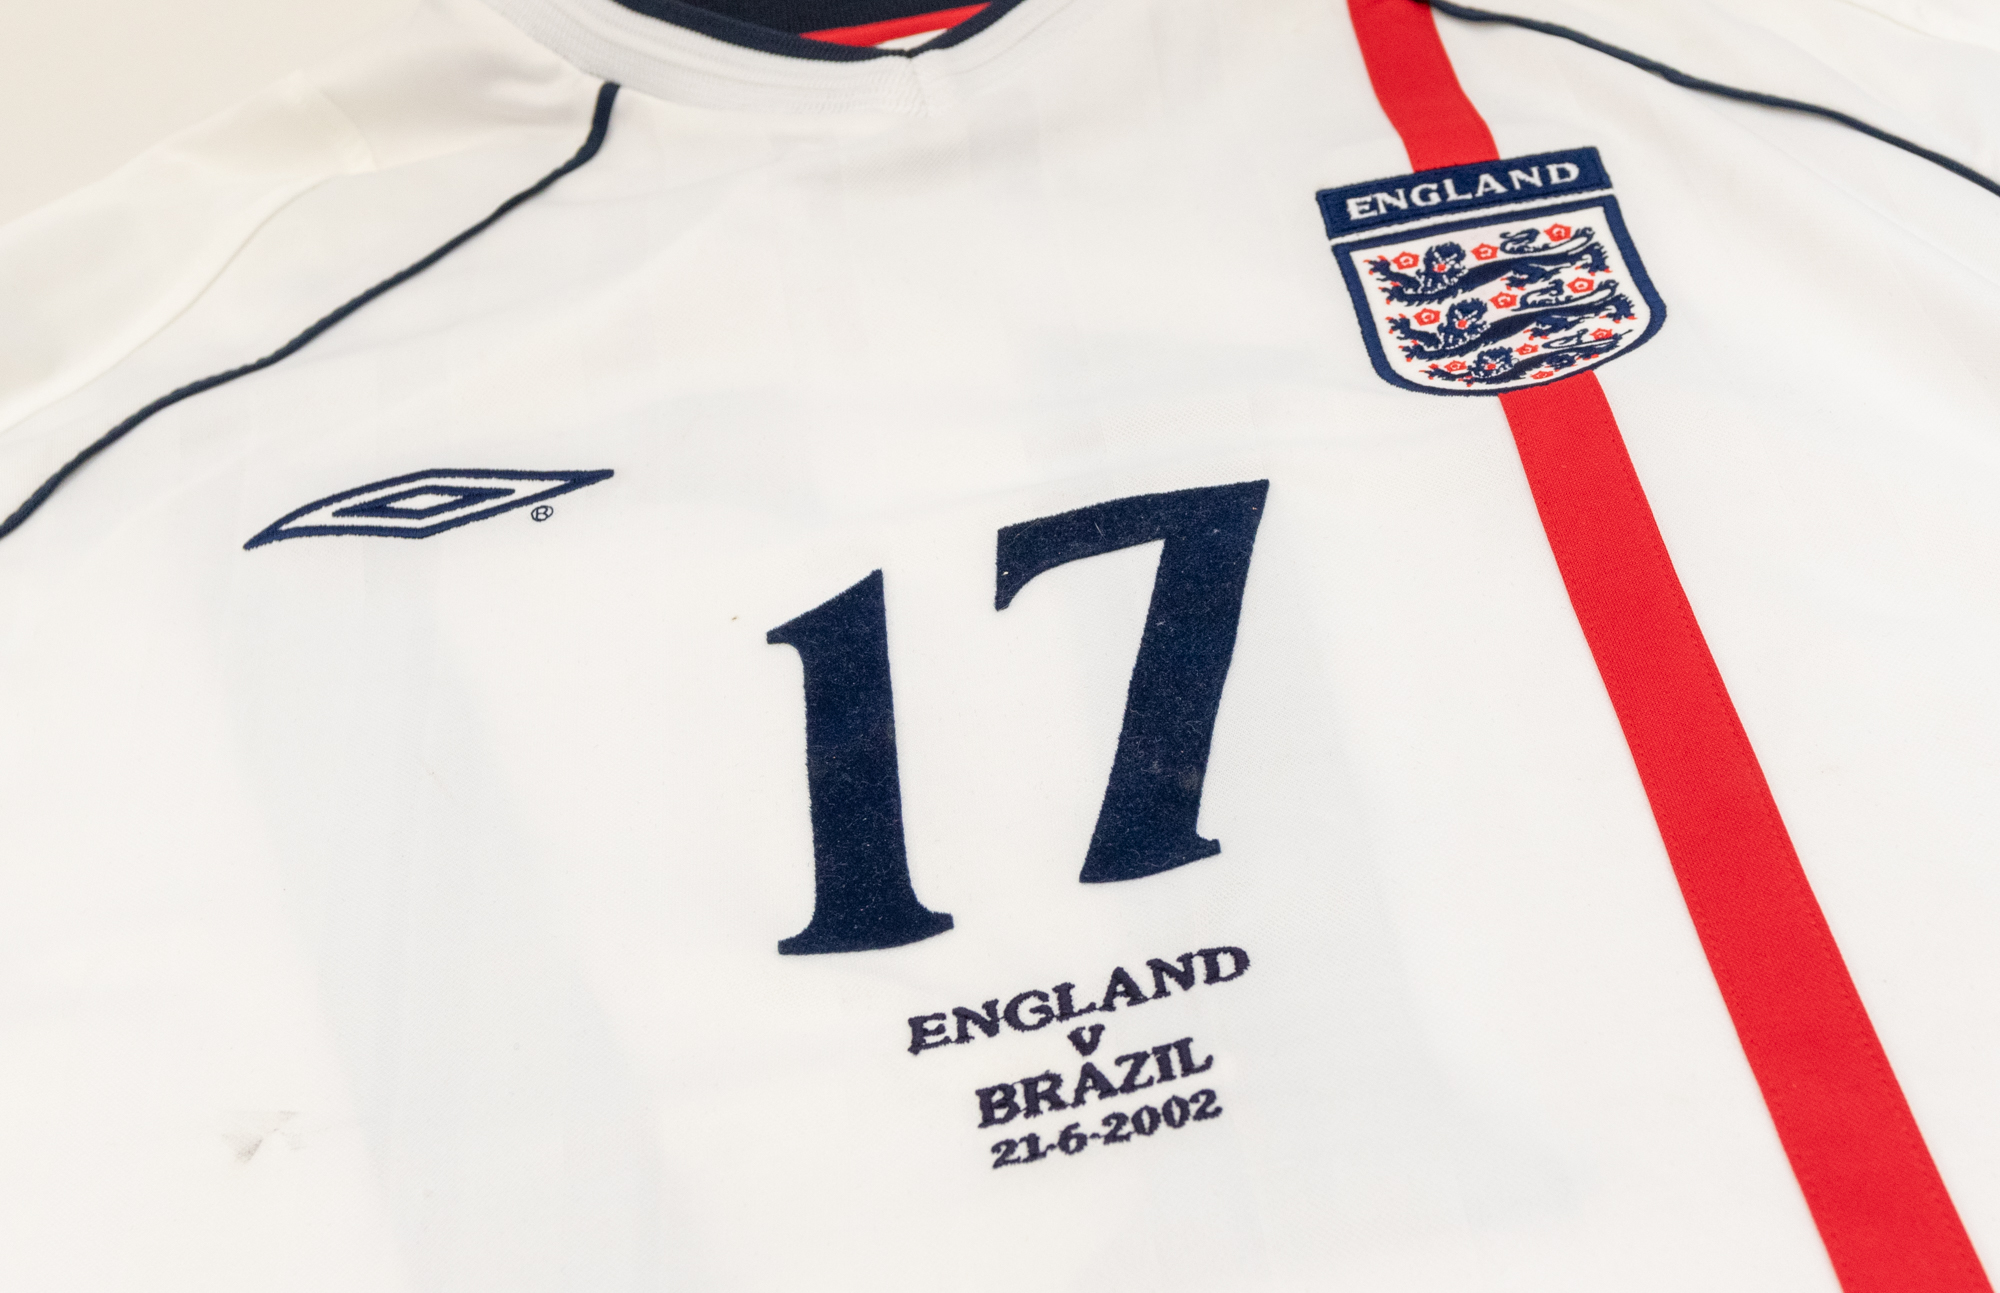 England: An England v. Brazil, World Cup 2002, 21st June 2002, match issued white England shirt. - Image 4 of 5